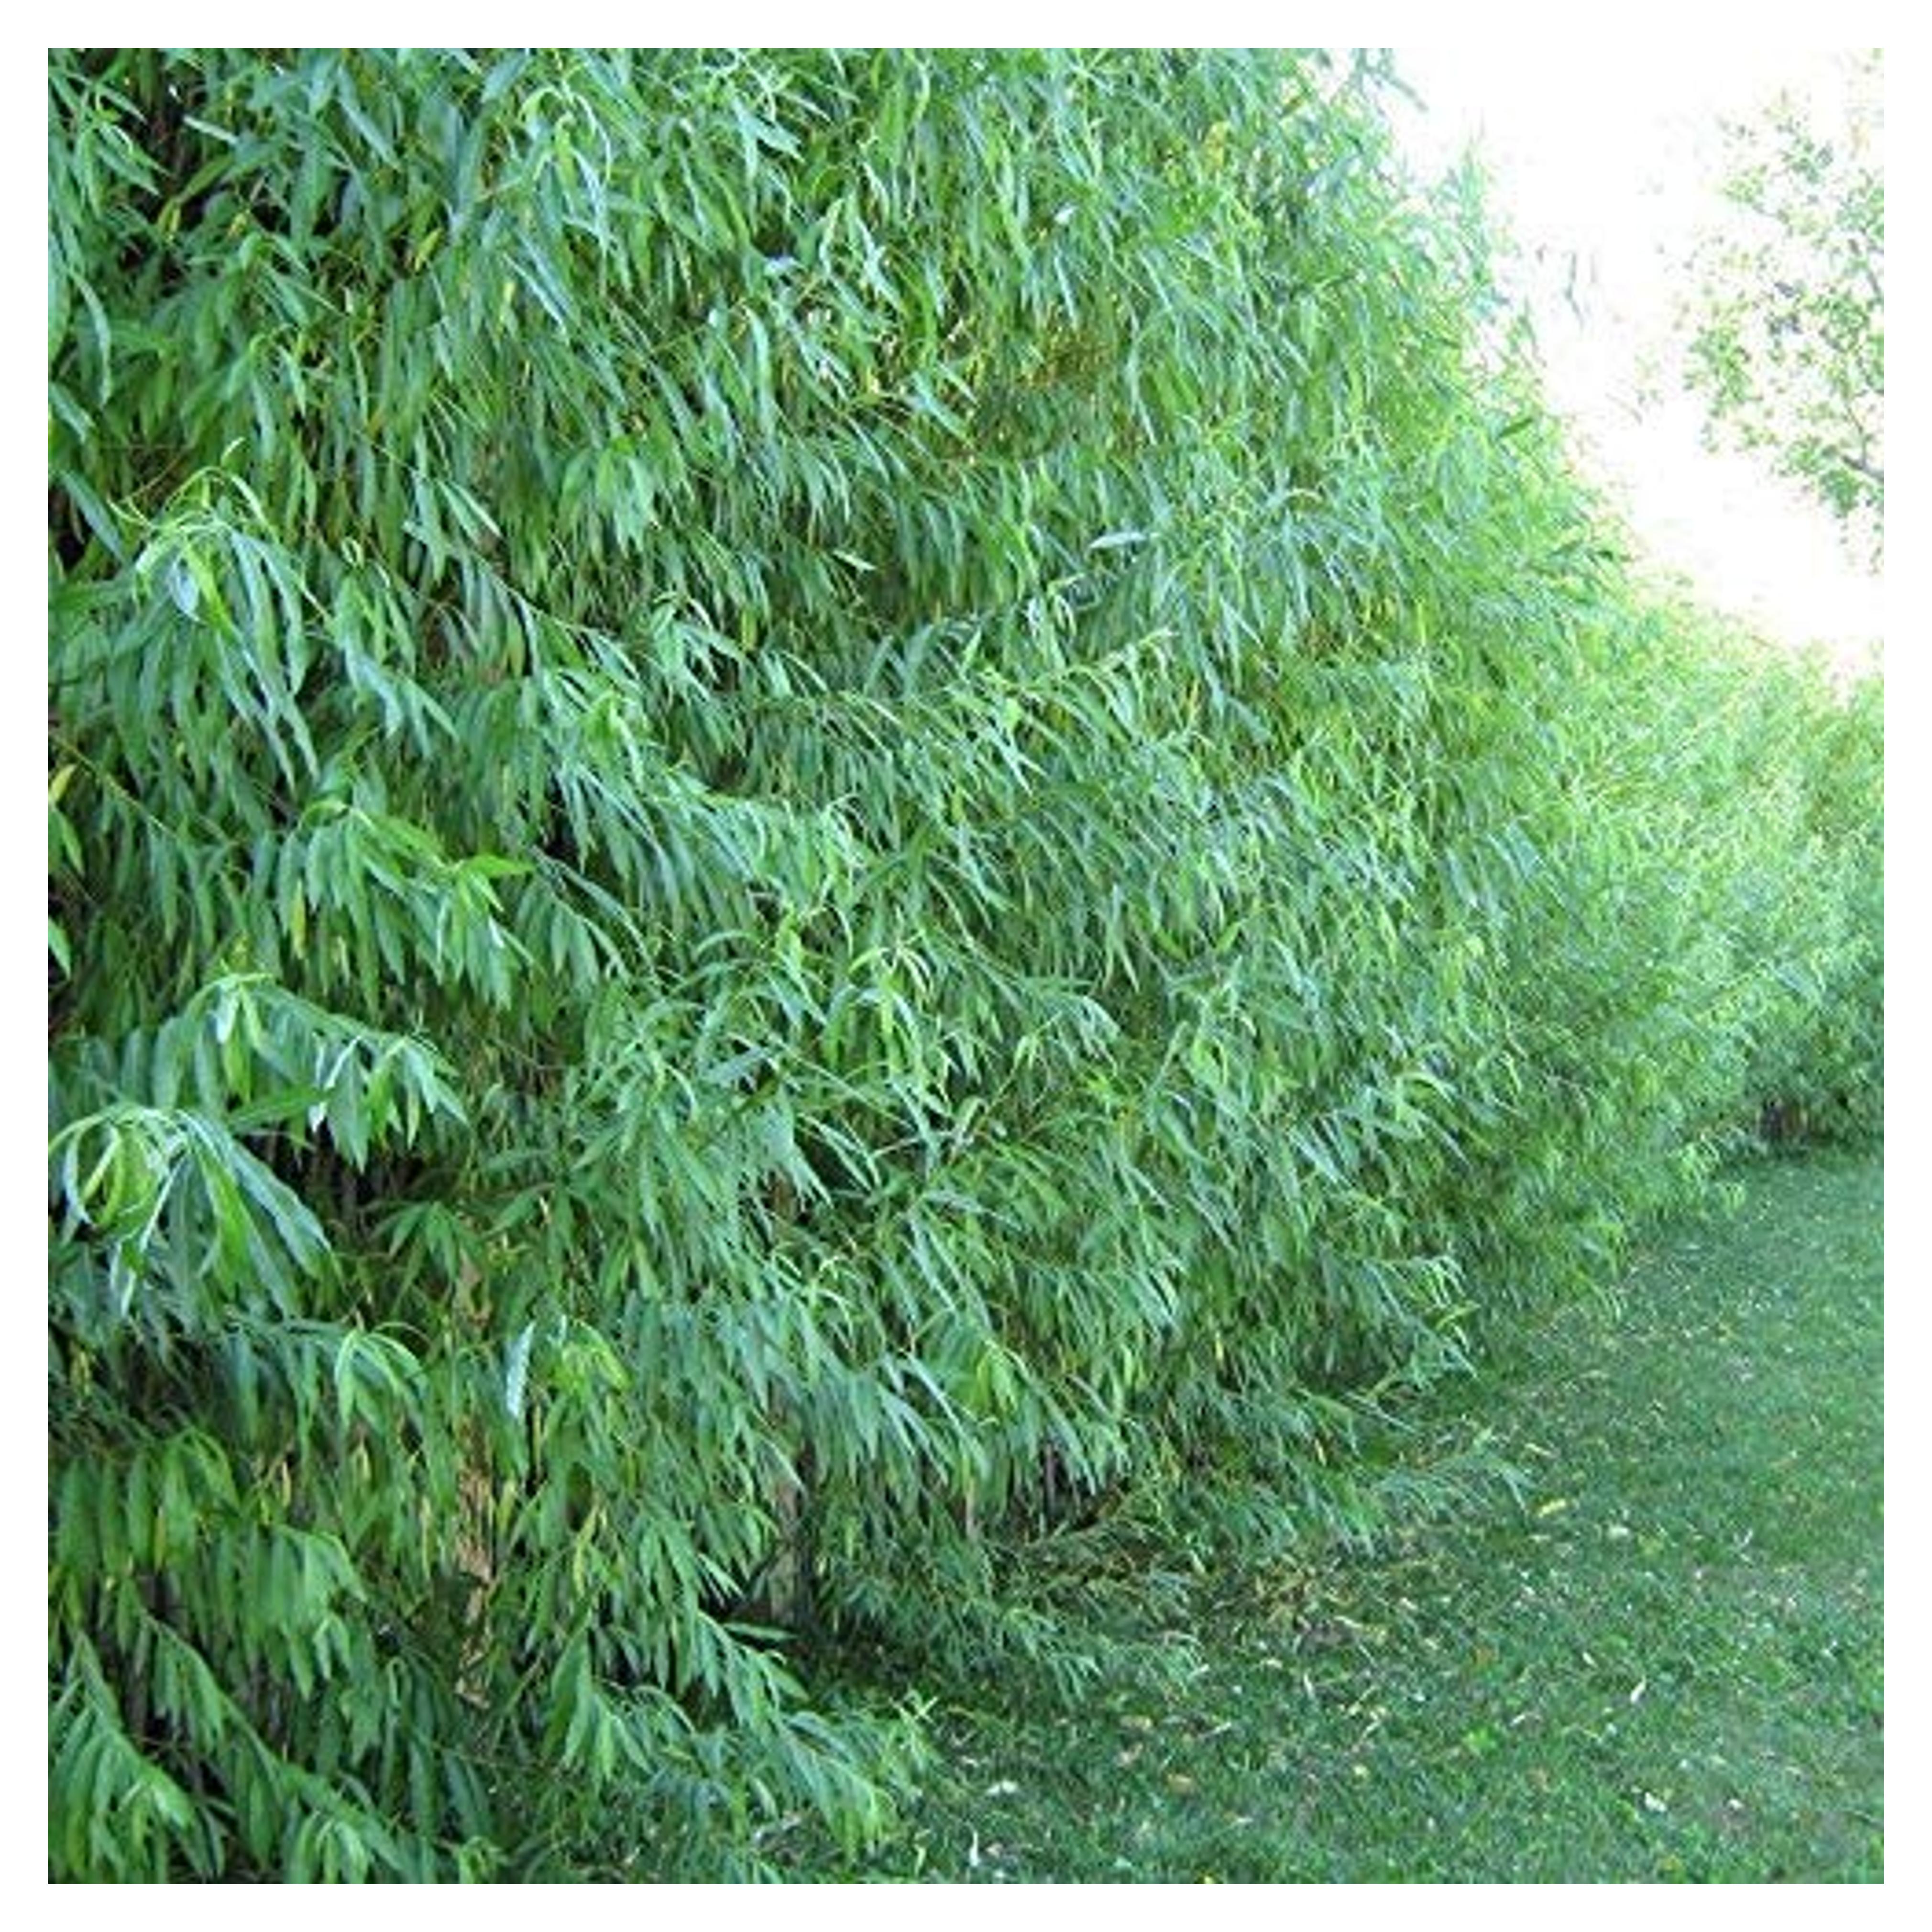 26 Hybrid Willow Trees - Ready to Plant - Fast Growing Shade Tree - 26 Indoor/Outdoor Live Tree Plants